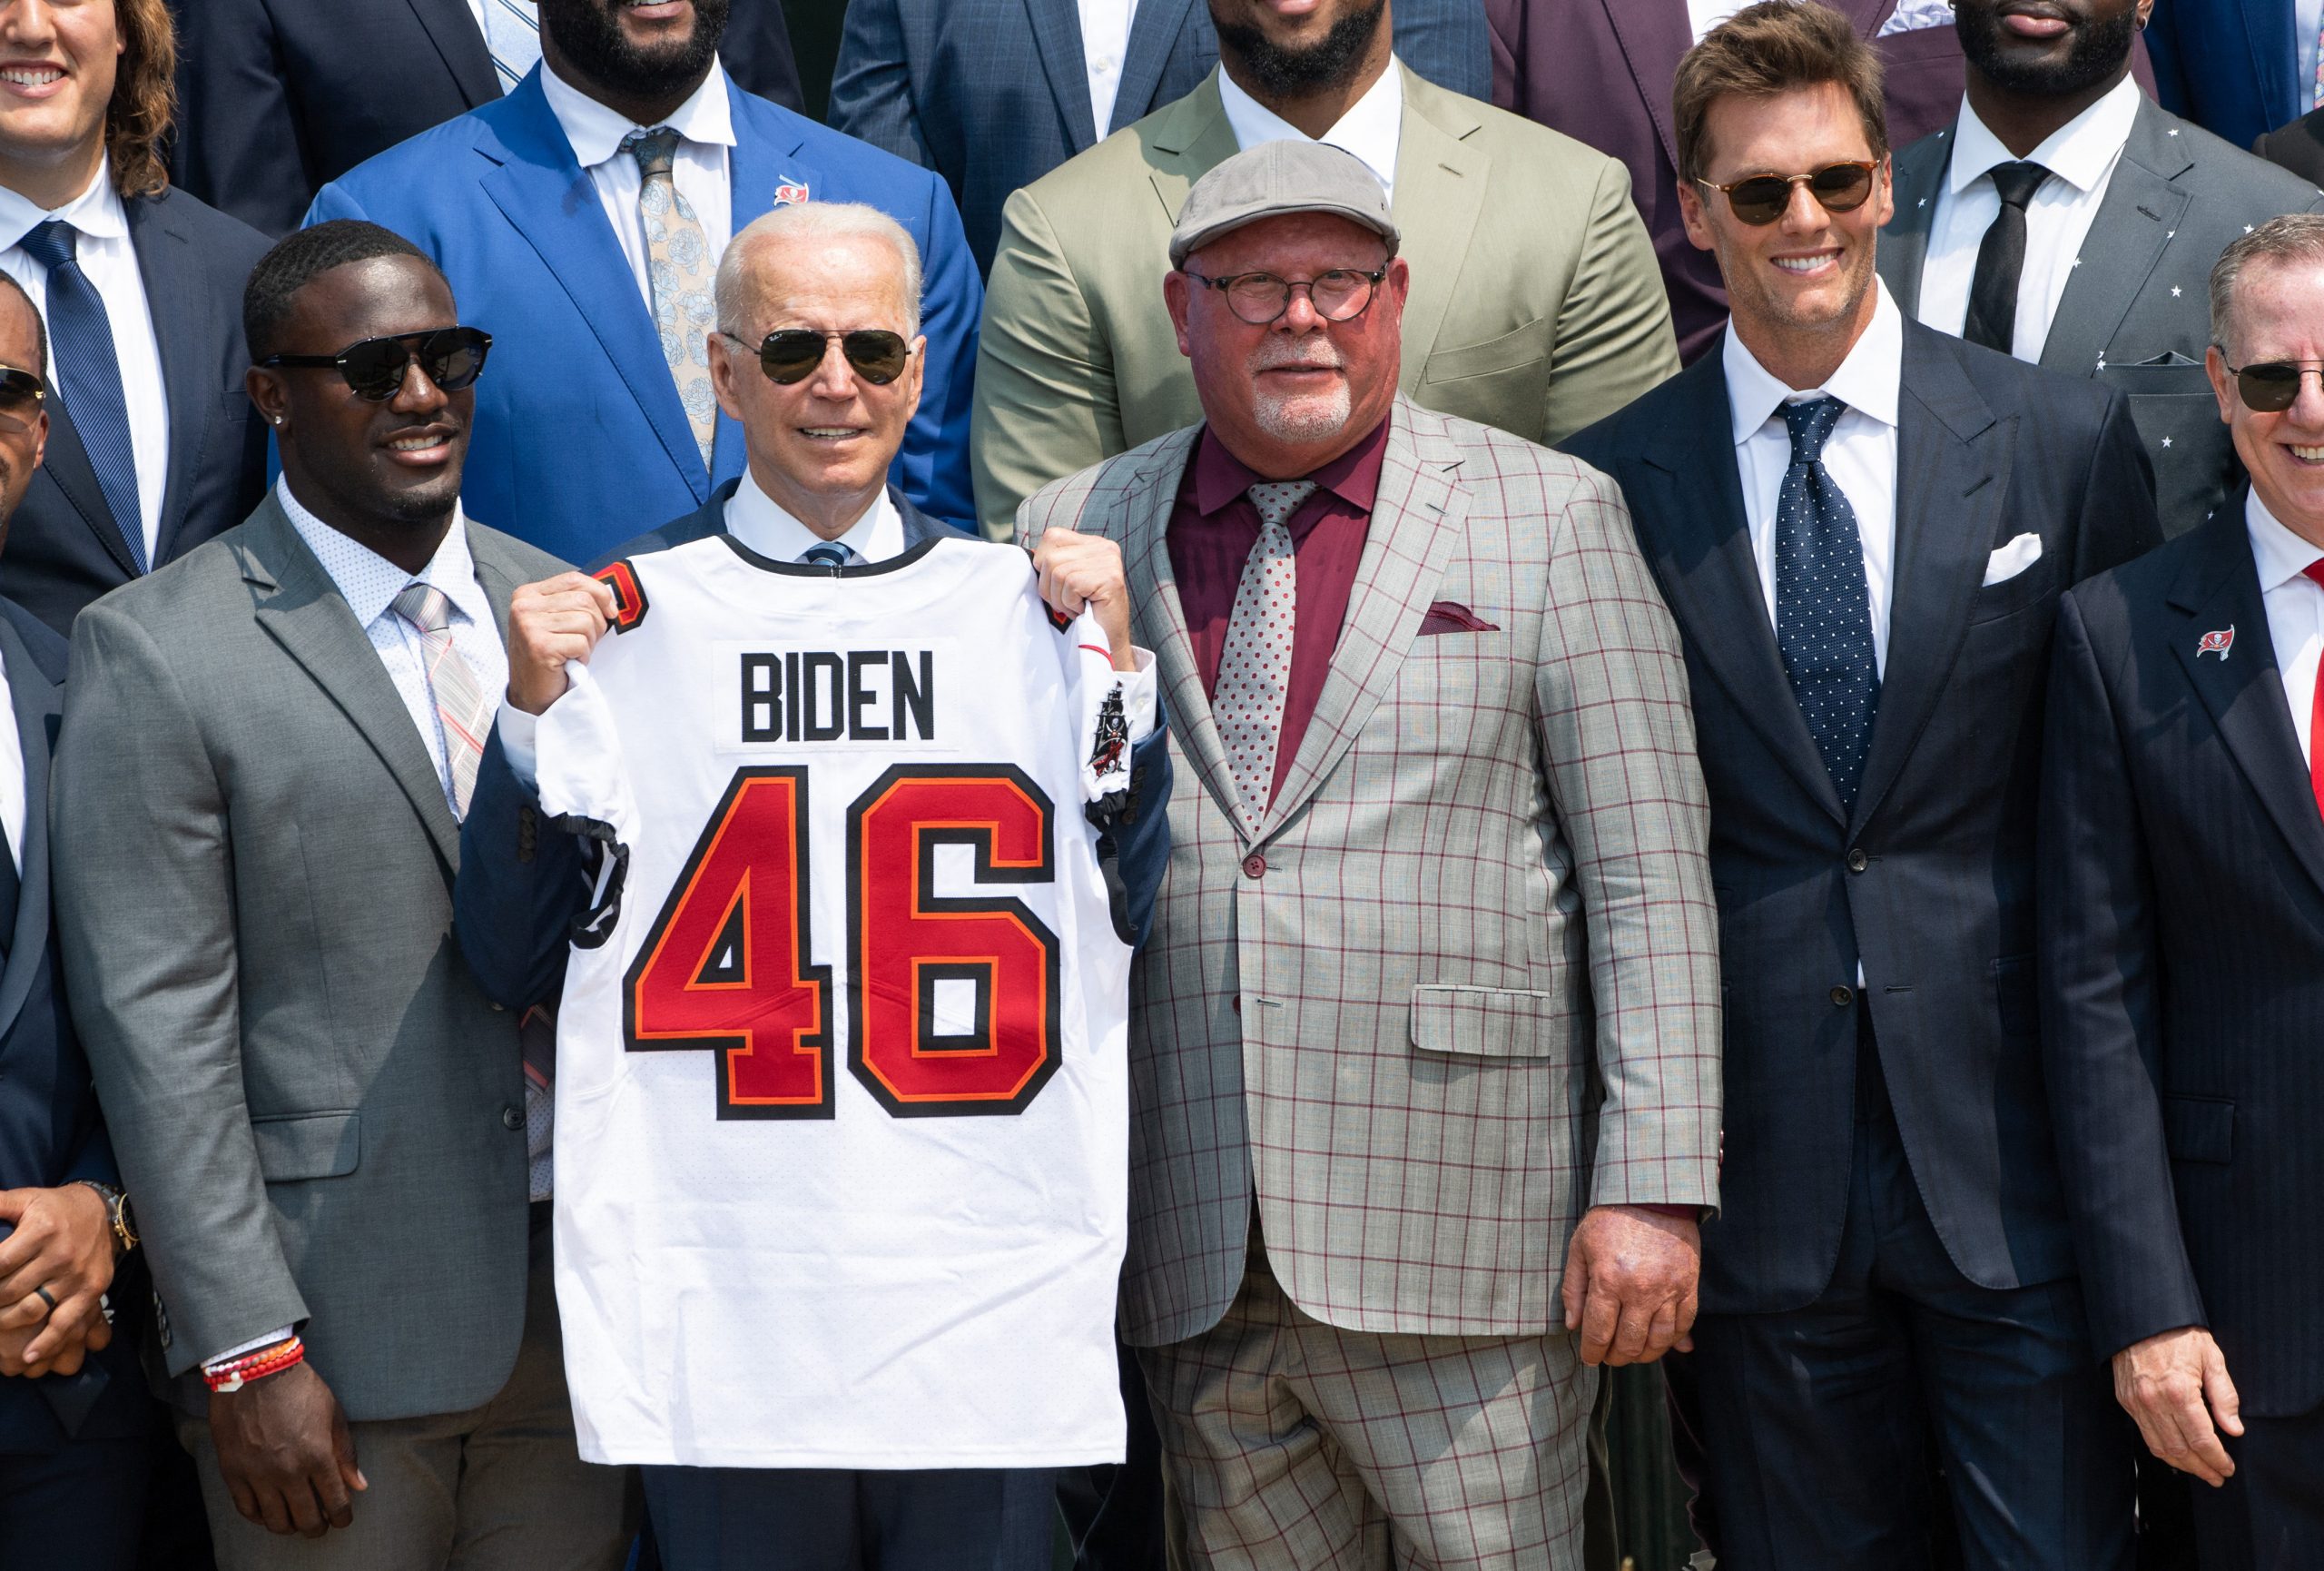 Jersey for Biden and jokes on Trump: Tom Brady’s day at the White House